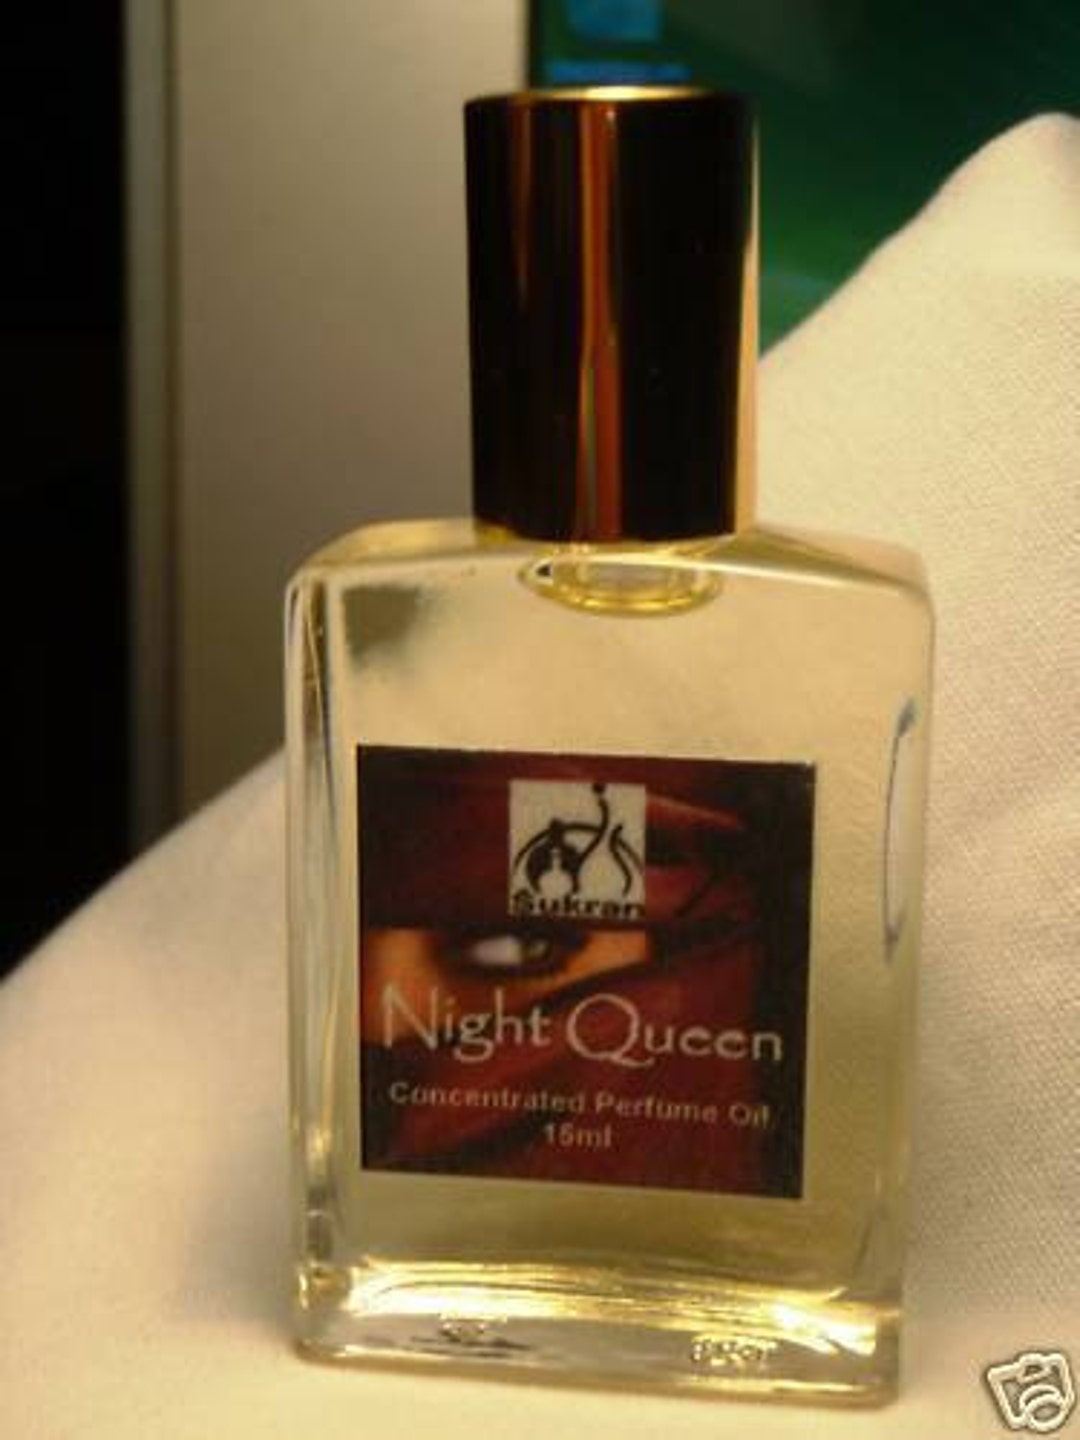 NIGHT QUEEN Concentrated Perfume Oil Attar 15ml Deliciously 